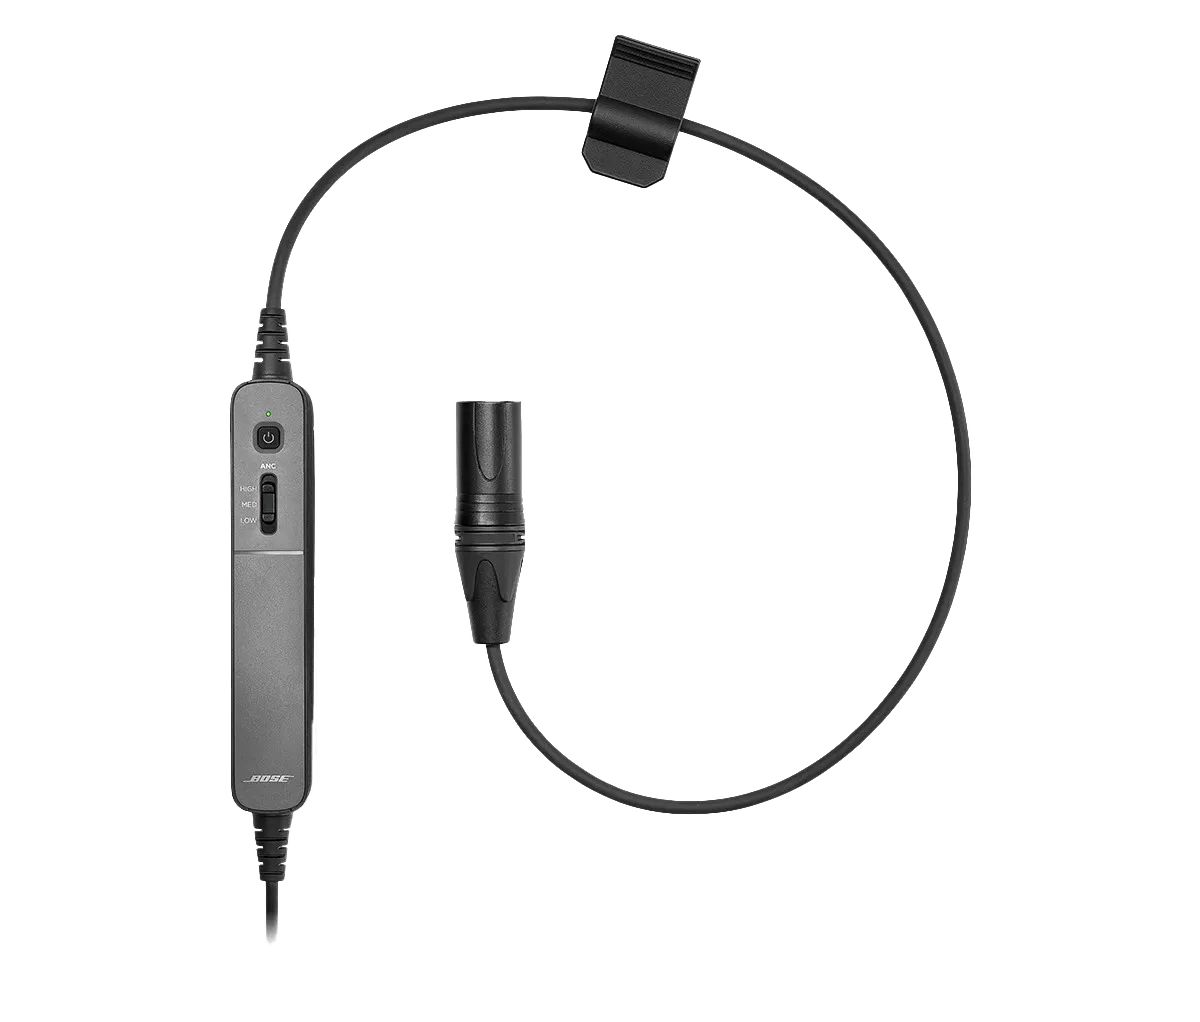 ProFlight Series 2 cable with 5 pin XLR plug